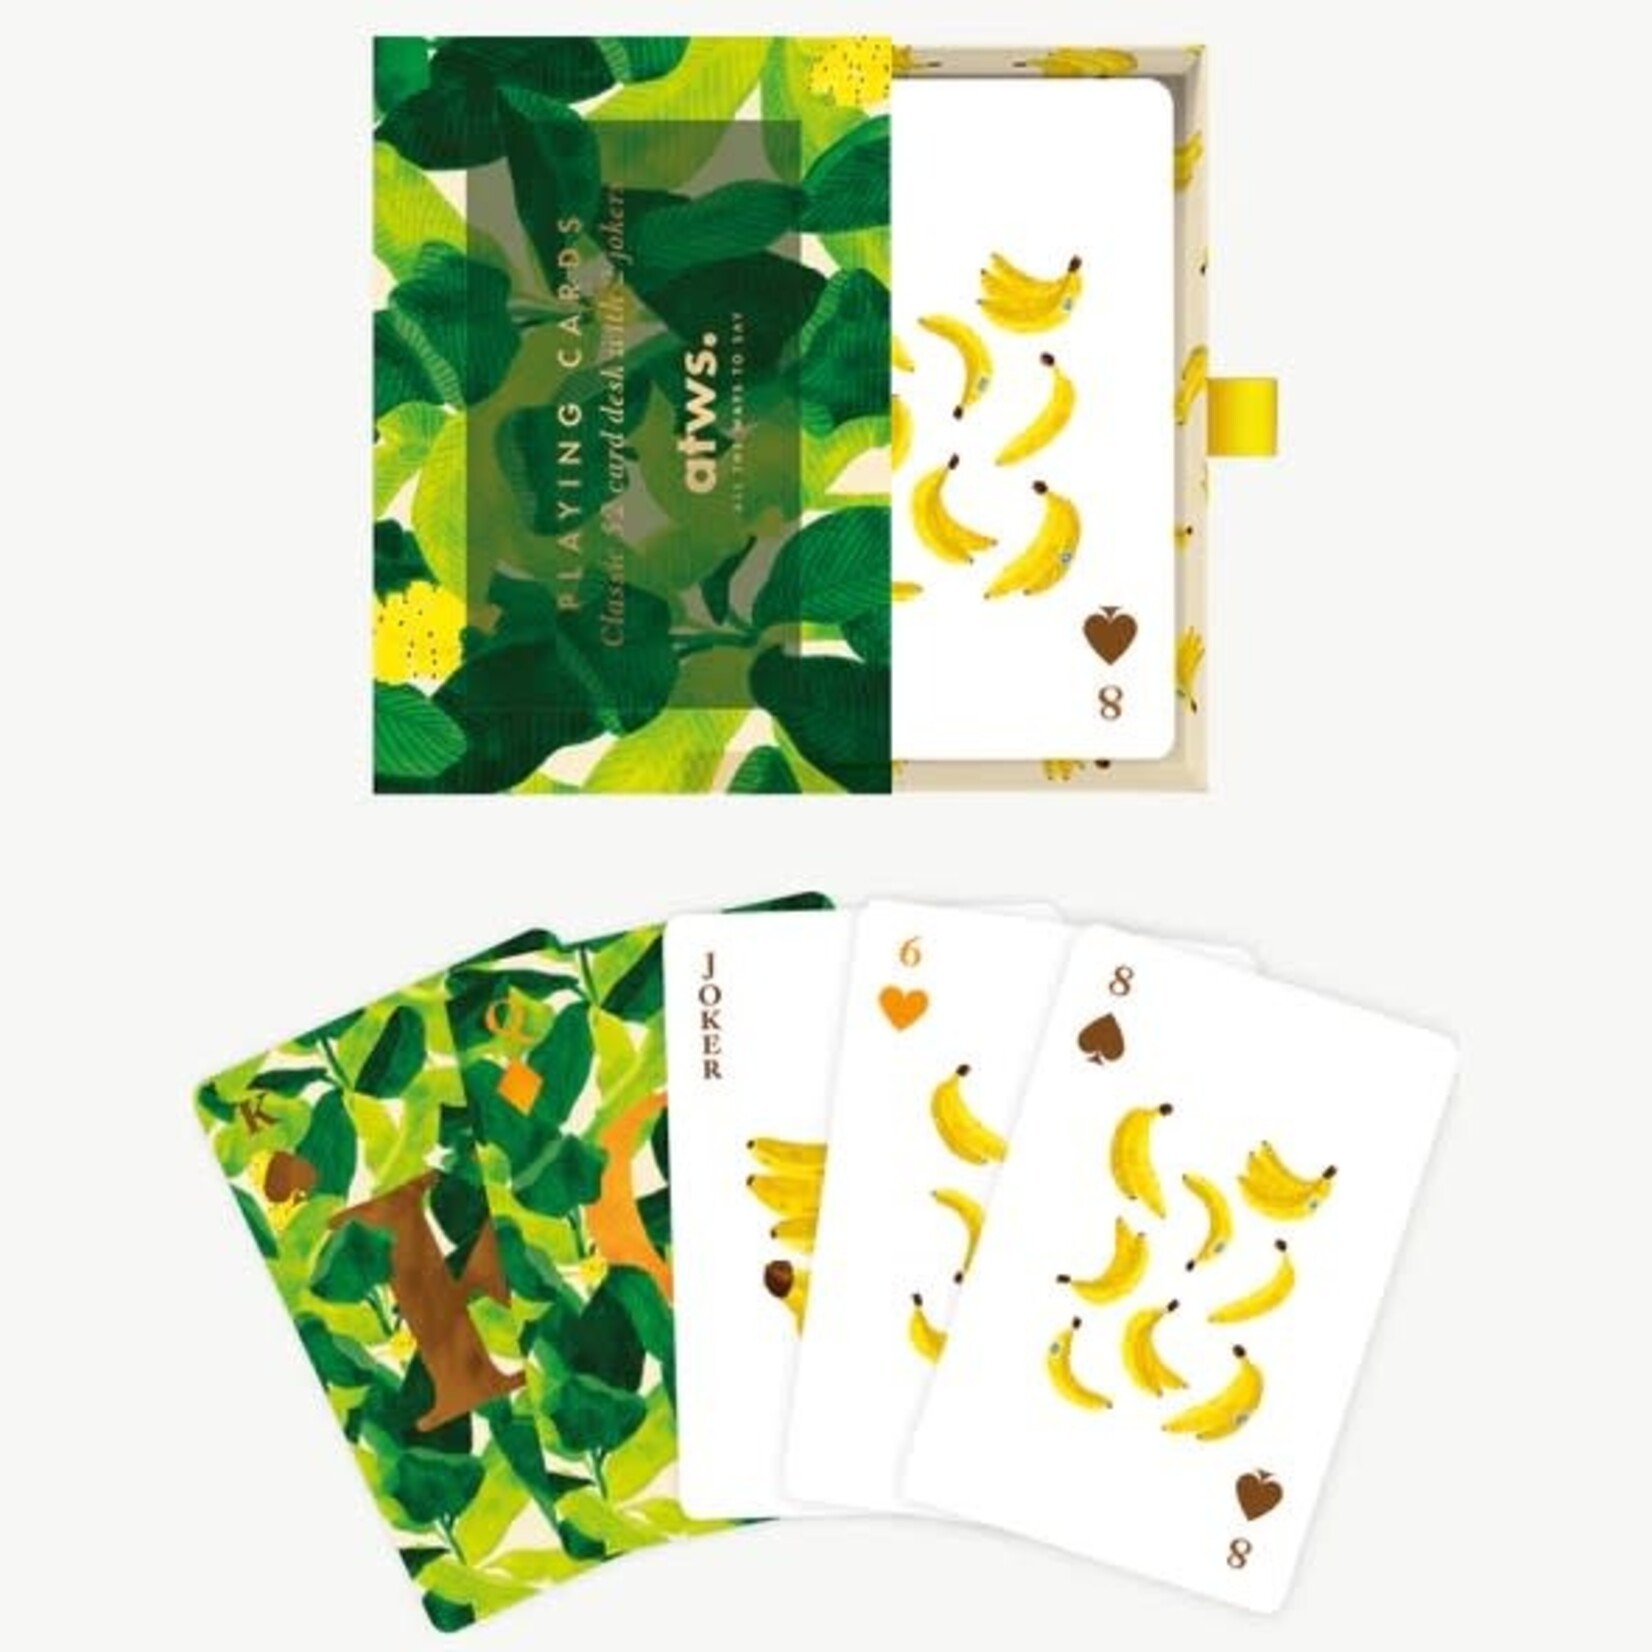 ALL THE WAYS TO SAY ALL THE WAYS TO SAY - Jeux de cartes - Beberly Hills Bananas Leaves